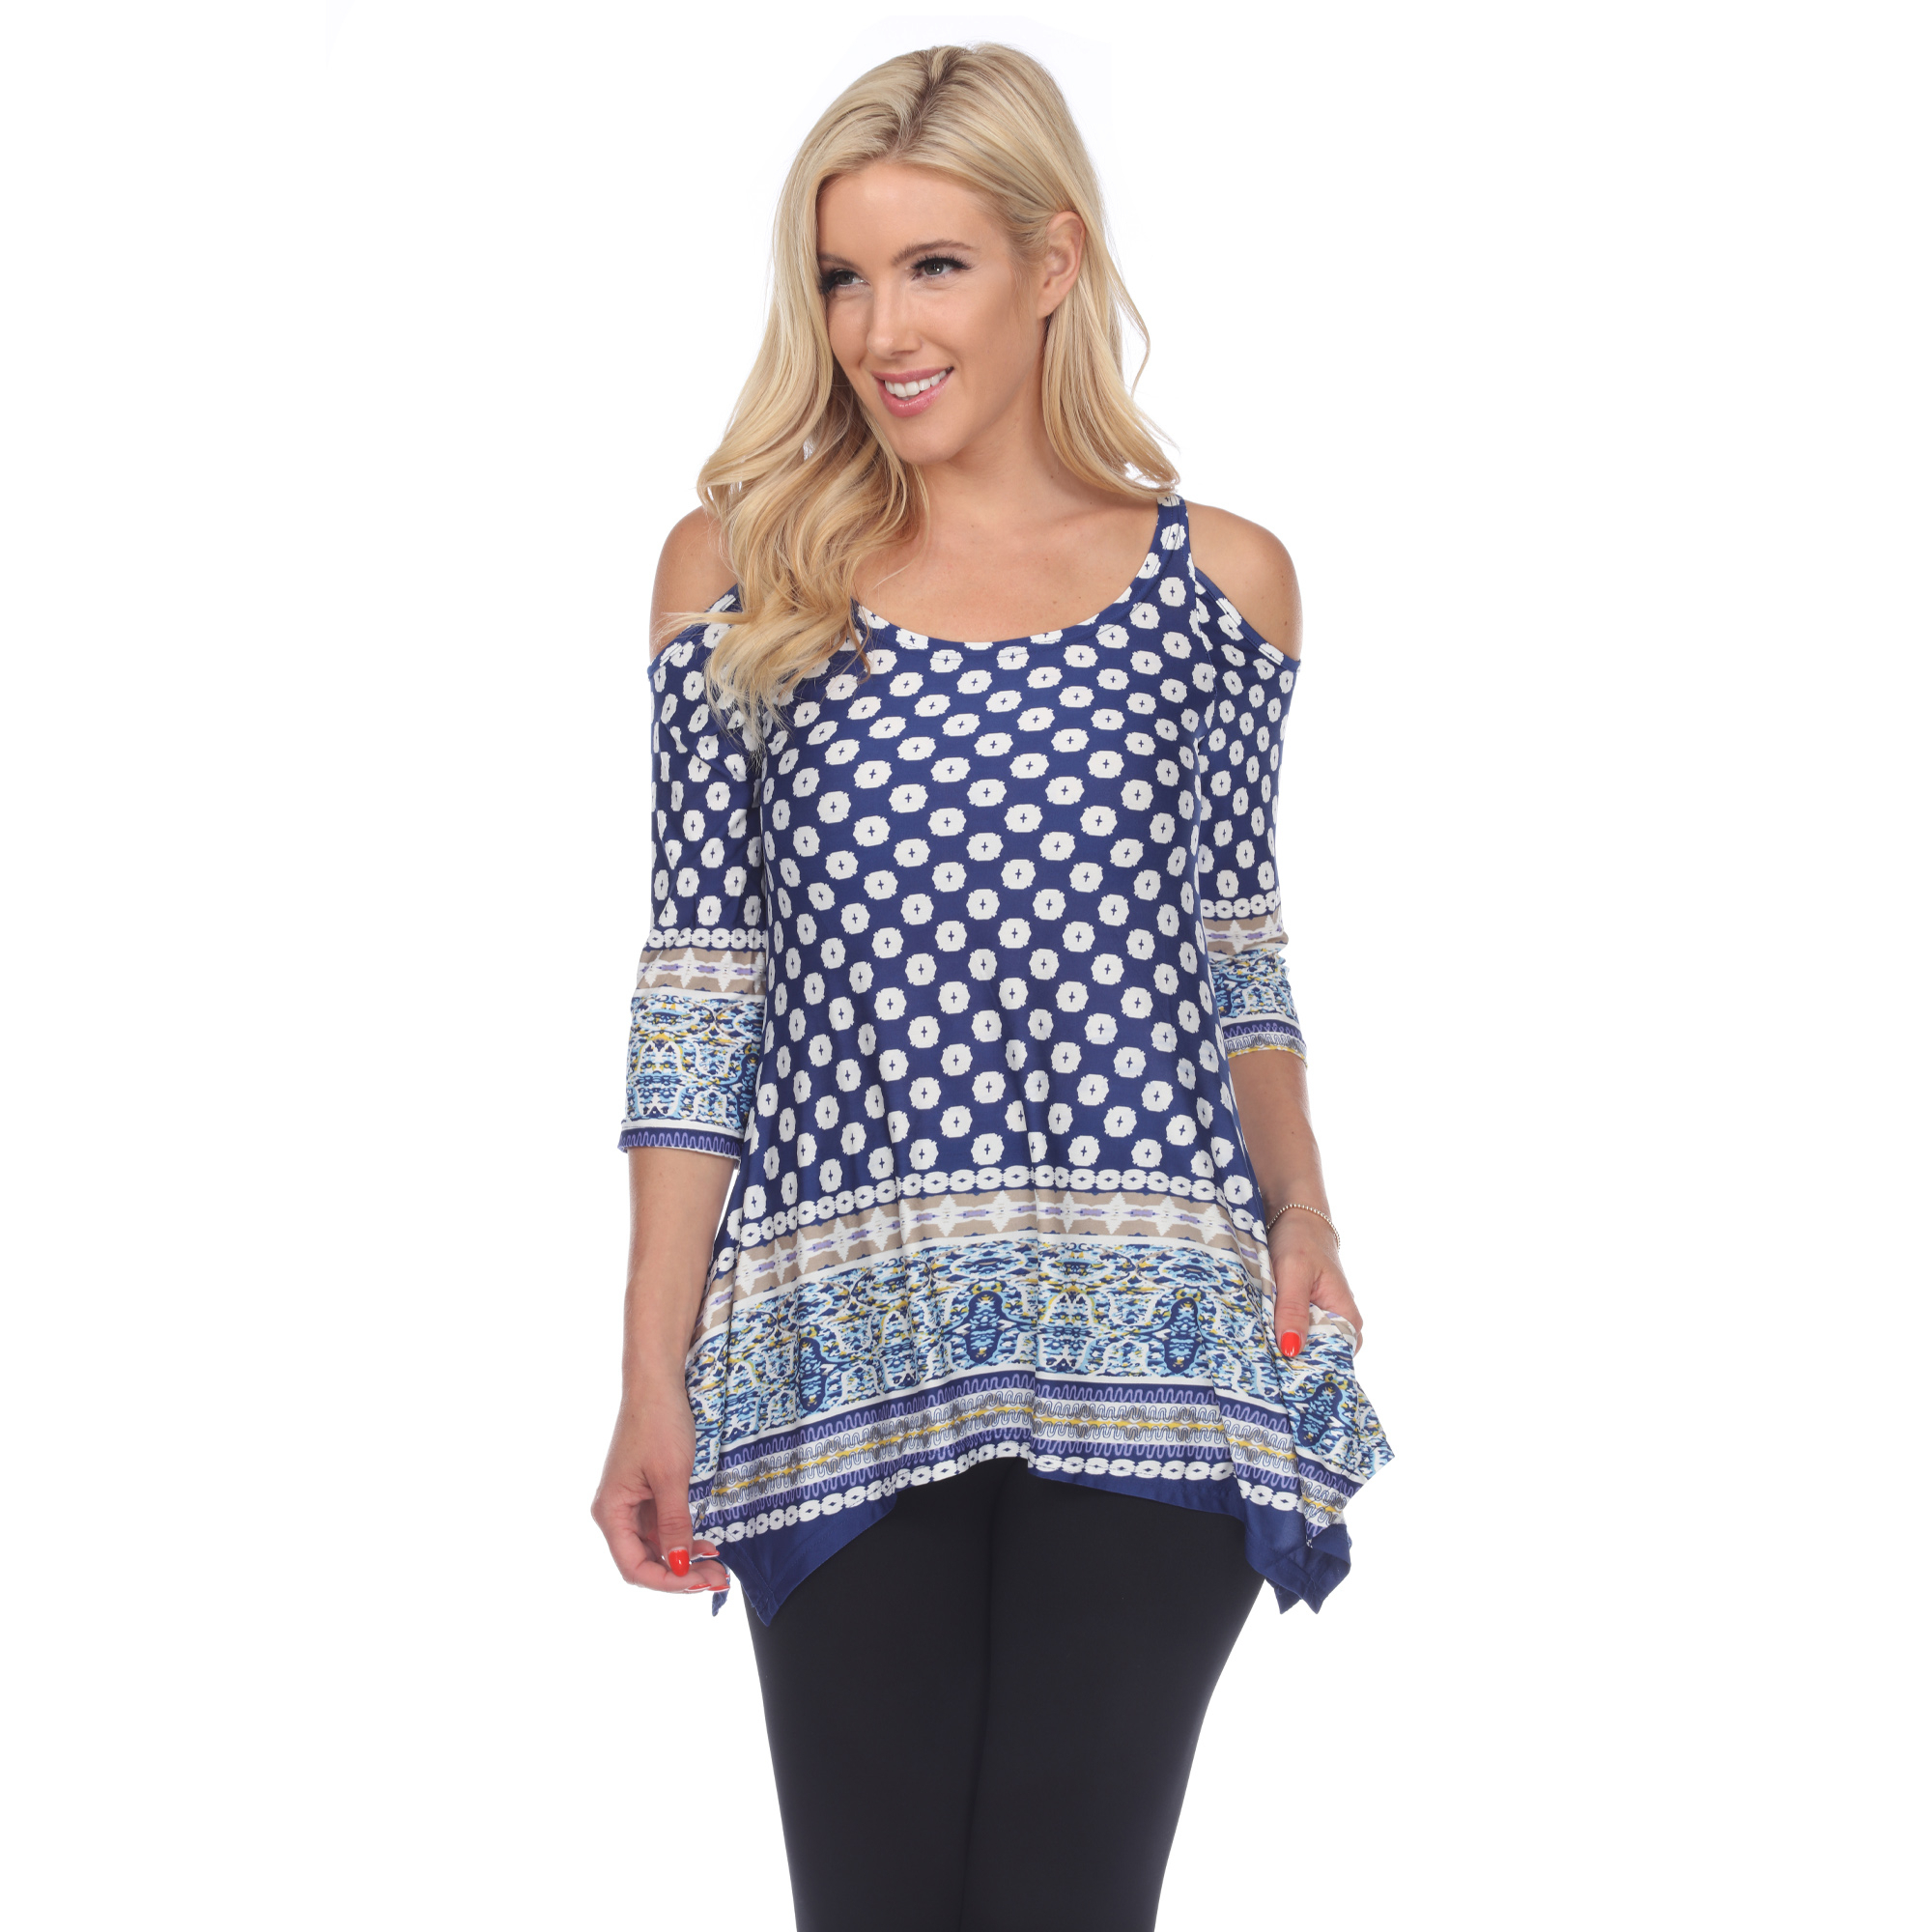 White Mark Women's Cold Shoulder Quarter Sleeve Printed Tunic Top With Pockets - Navy/White Polka Dots, 1X